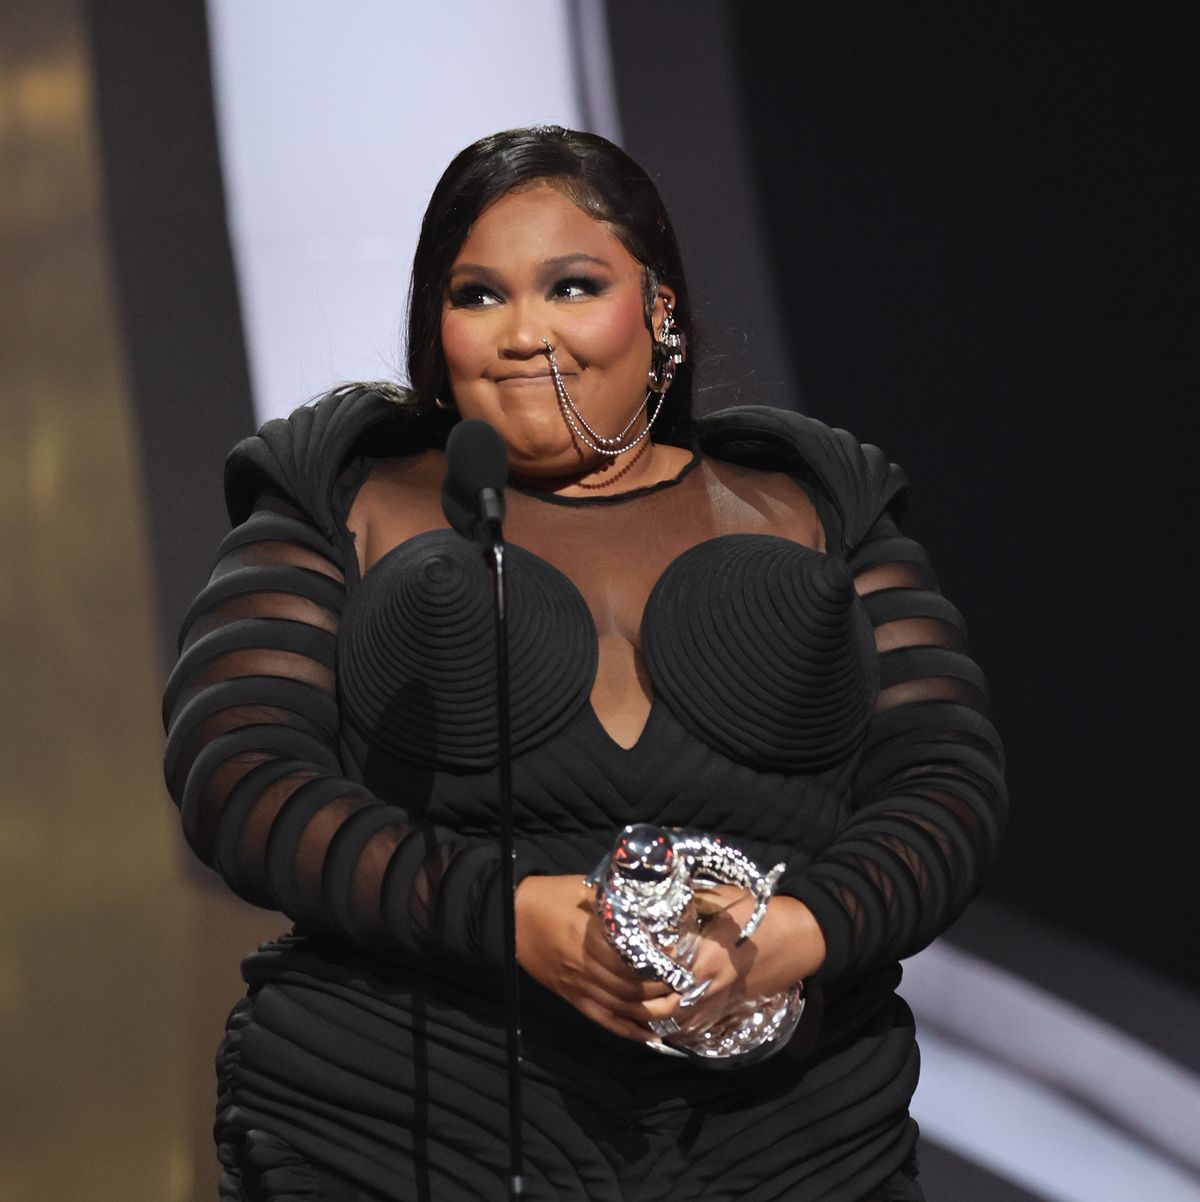 Lizzo Speaks Out About the 'Fake Doctors' in the Comments: 'Bodies Are Not  All Designed to Be Slim With a Six Pack': Photo 4536378, Lizzo Photos